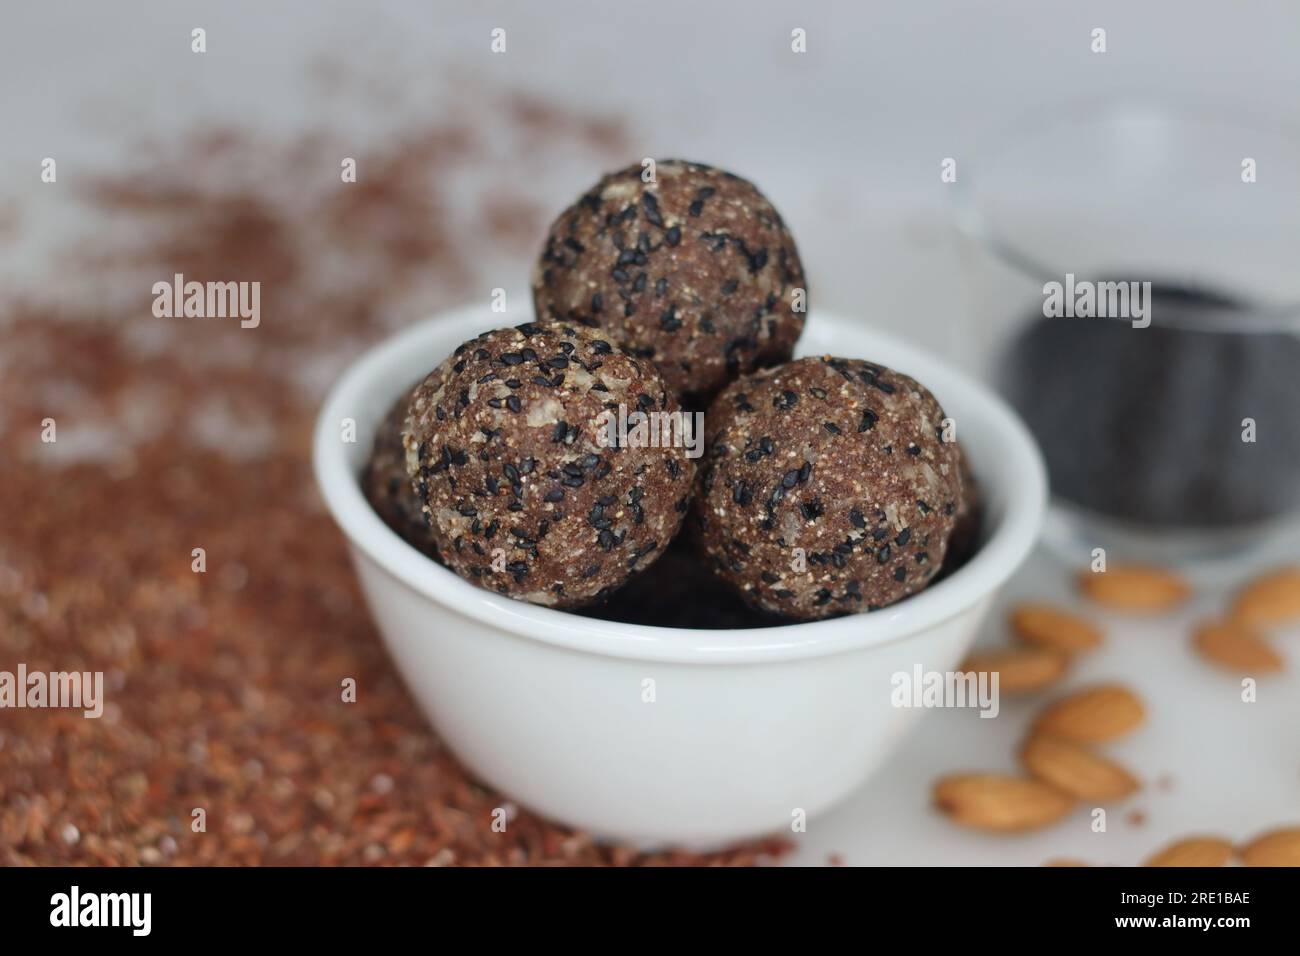 Navara til laddu. Sweet ball made of roasted and ground navara rice, roasted sesame seeds, jaggery and grated coconut flavored with cardamom. Healthy Stock Photo